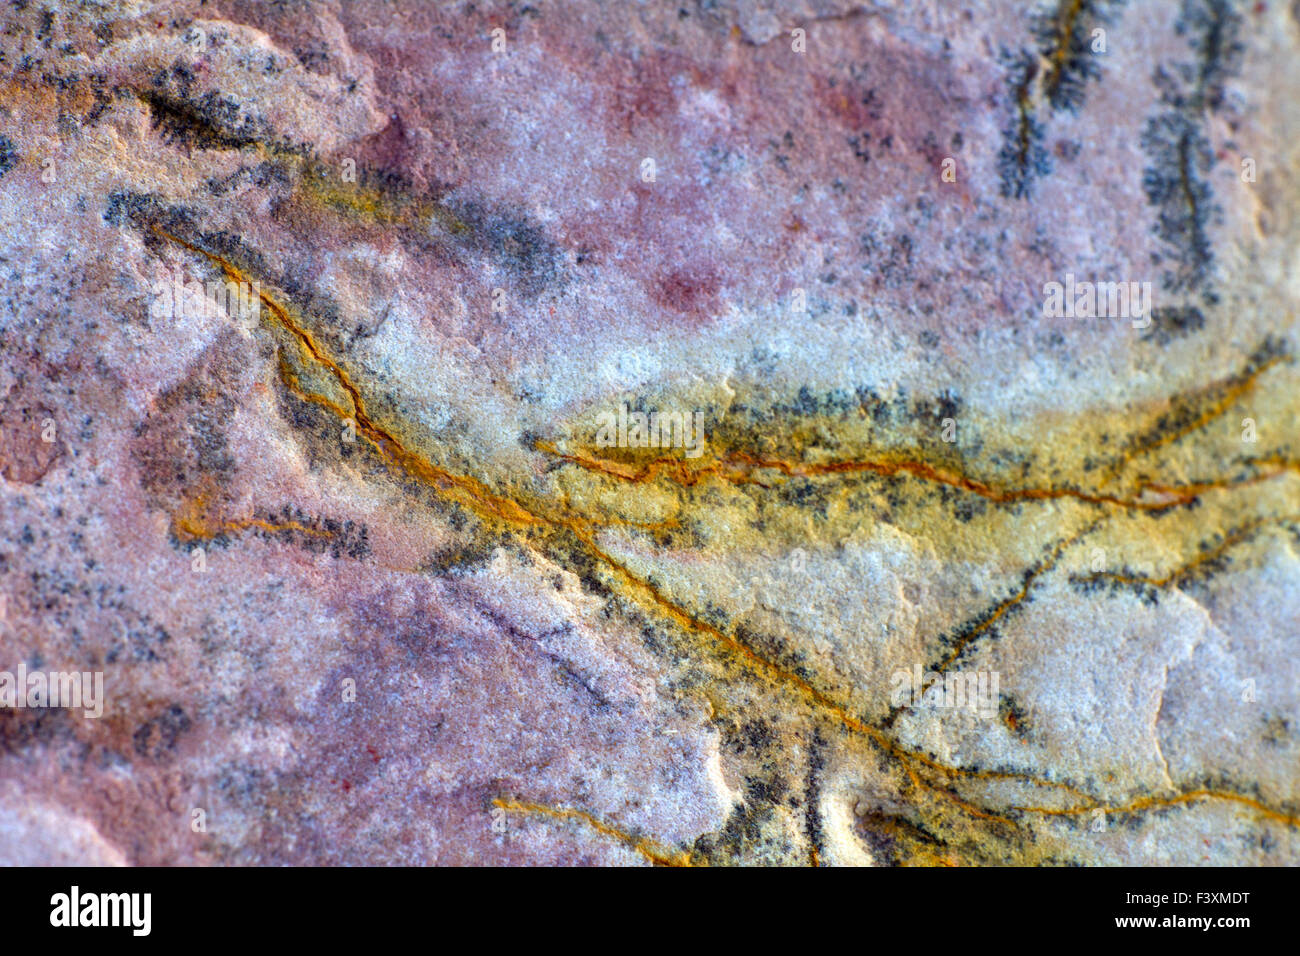 paleontology: fossil (not the museum) Stock Photo